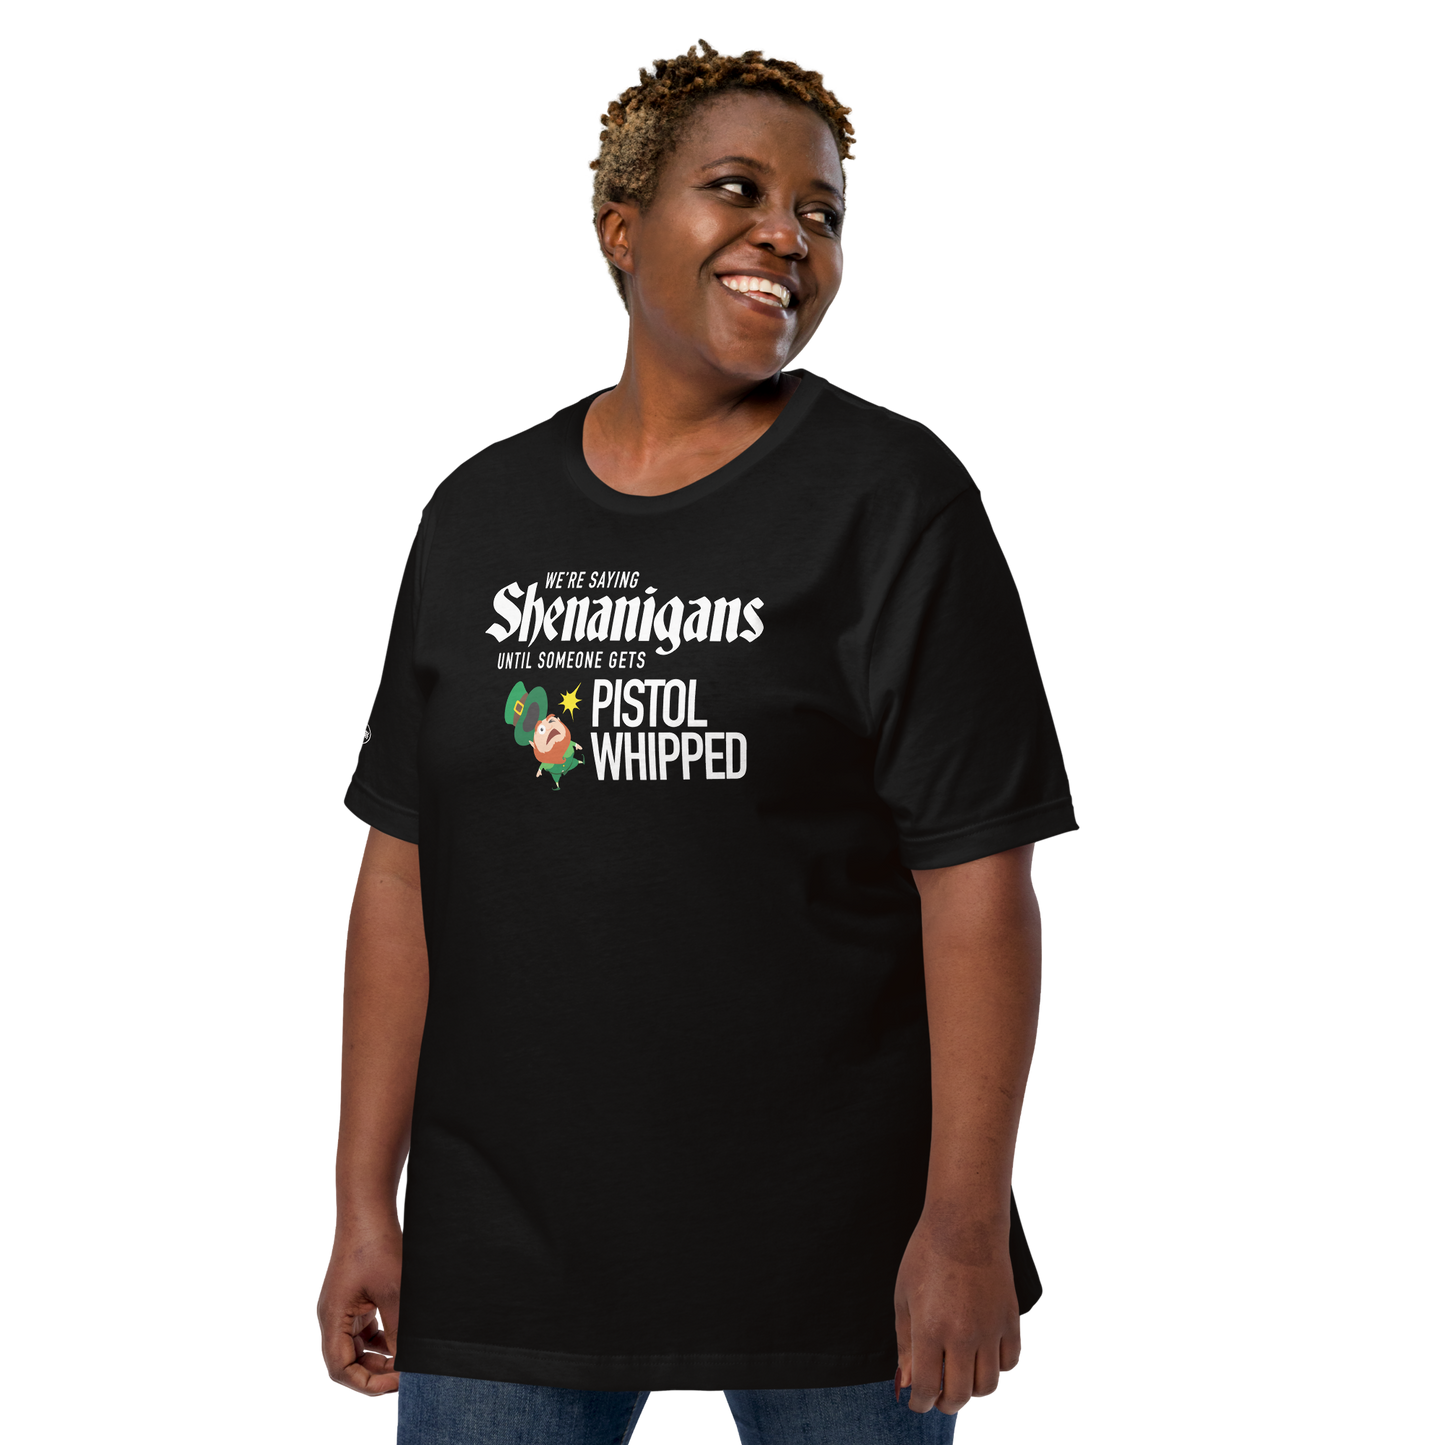 St. Patrick's Day Super Troopers - Shenanigans Until Someone Gets Pistol Whipped - Funny T-Shirt